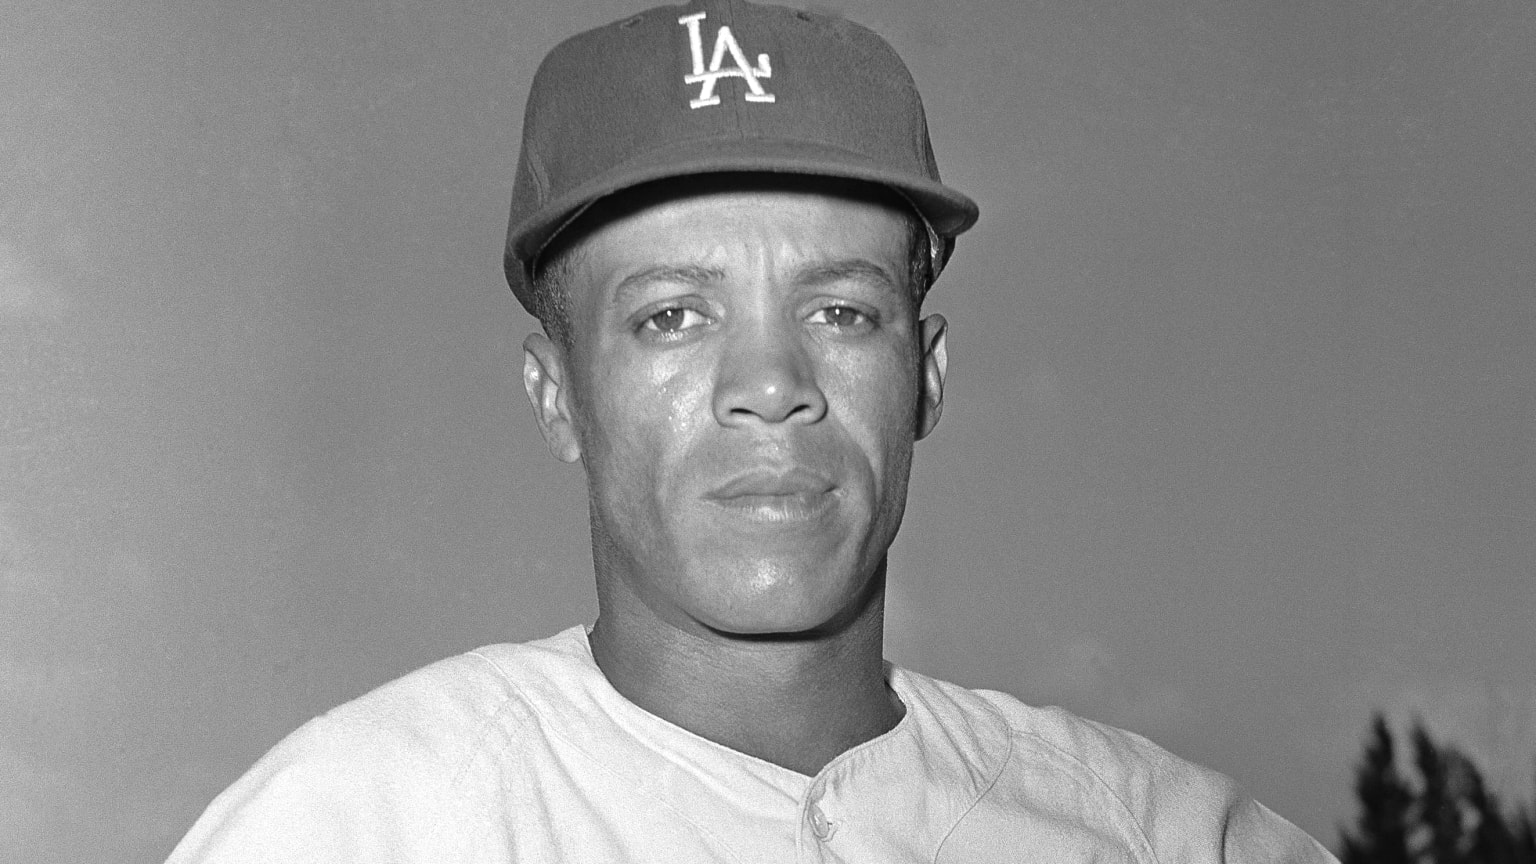 A black-and-white portrait of Maury Wills wearing an LA Dodgers cap